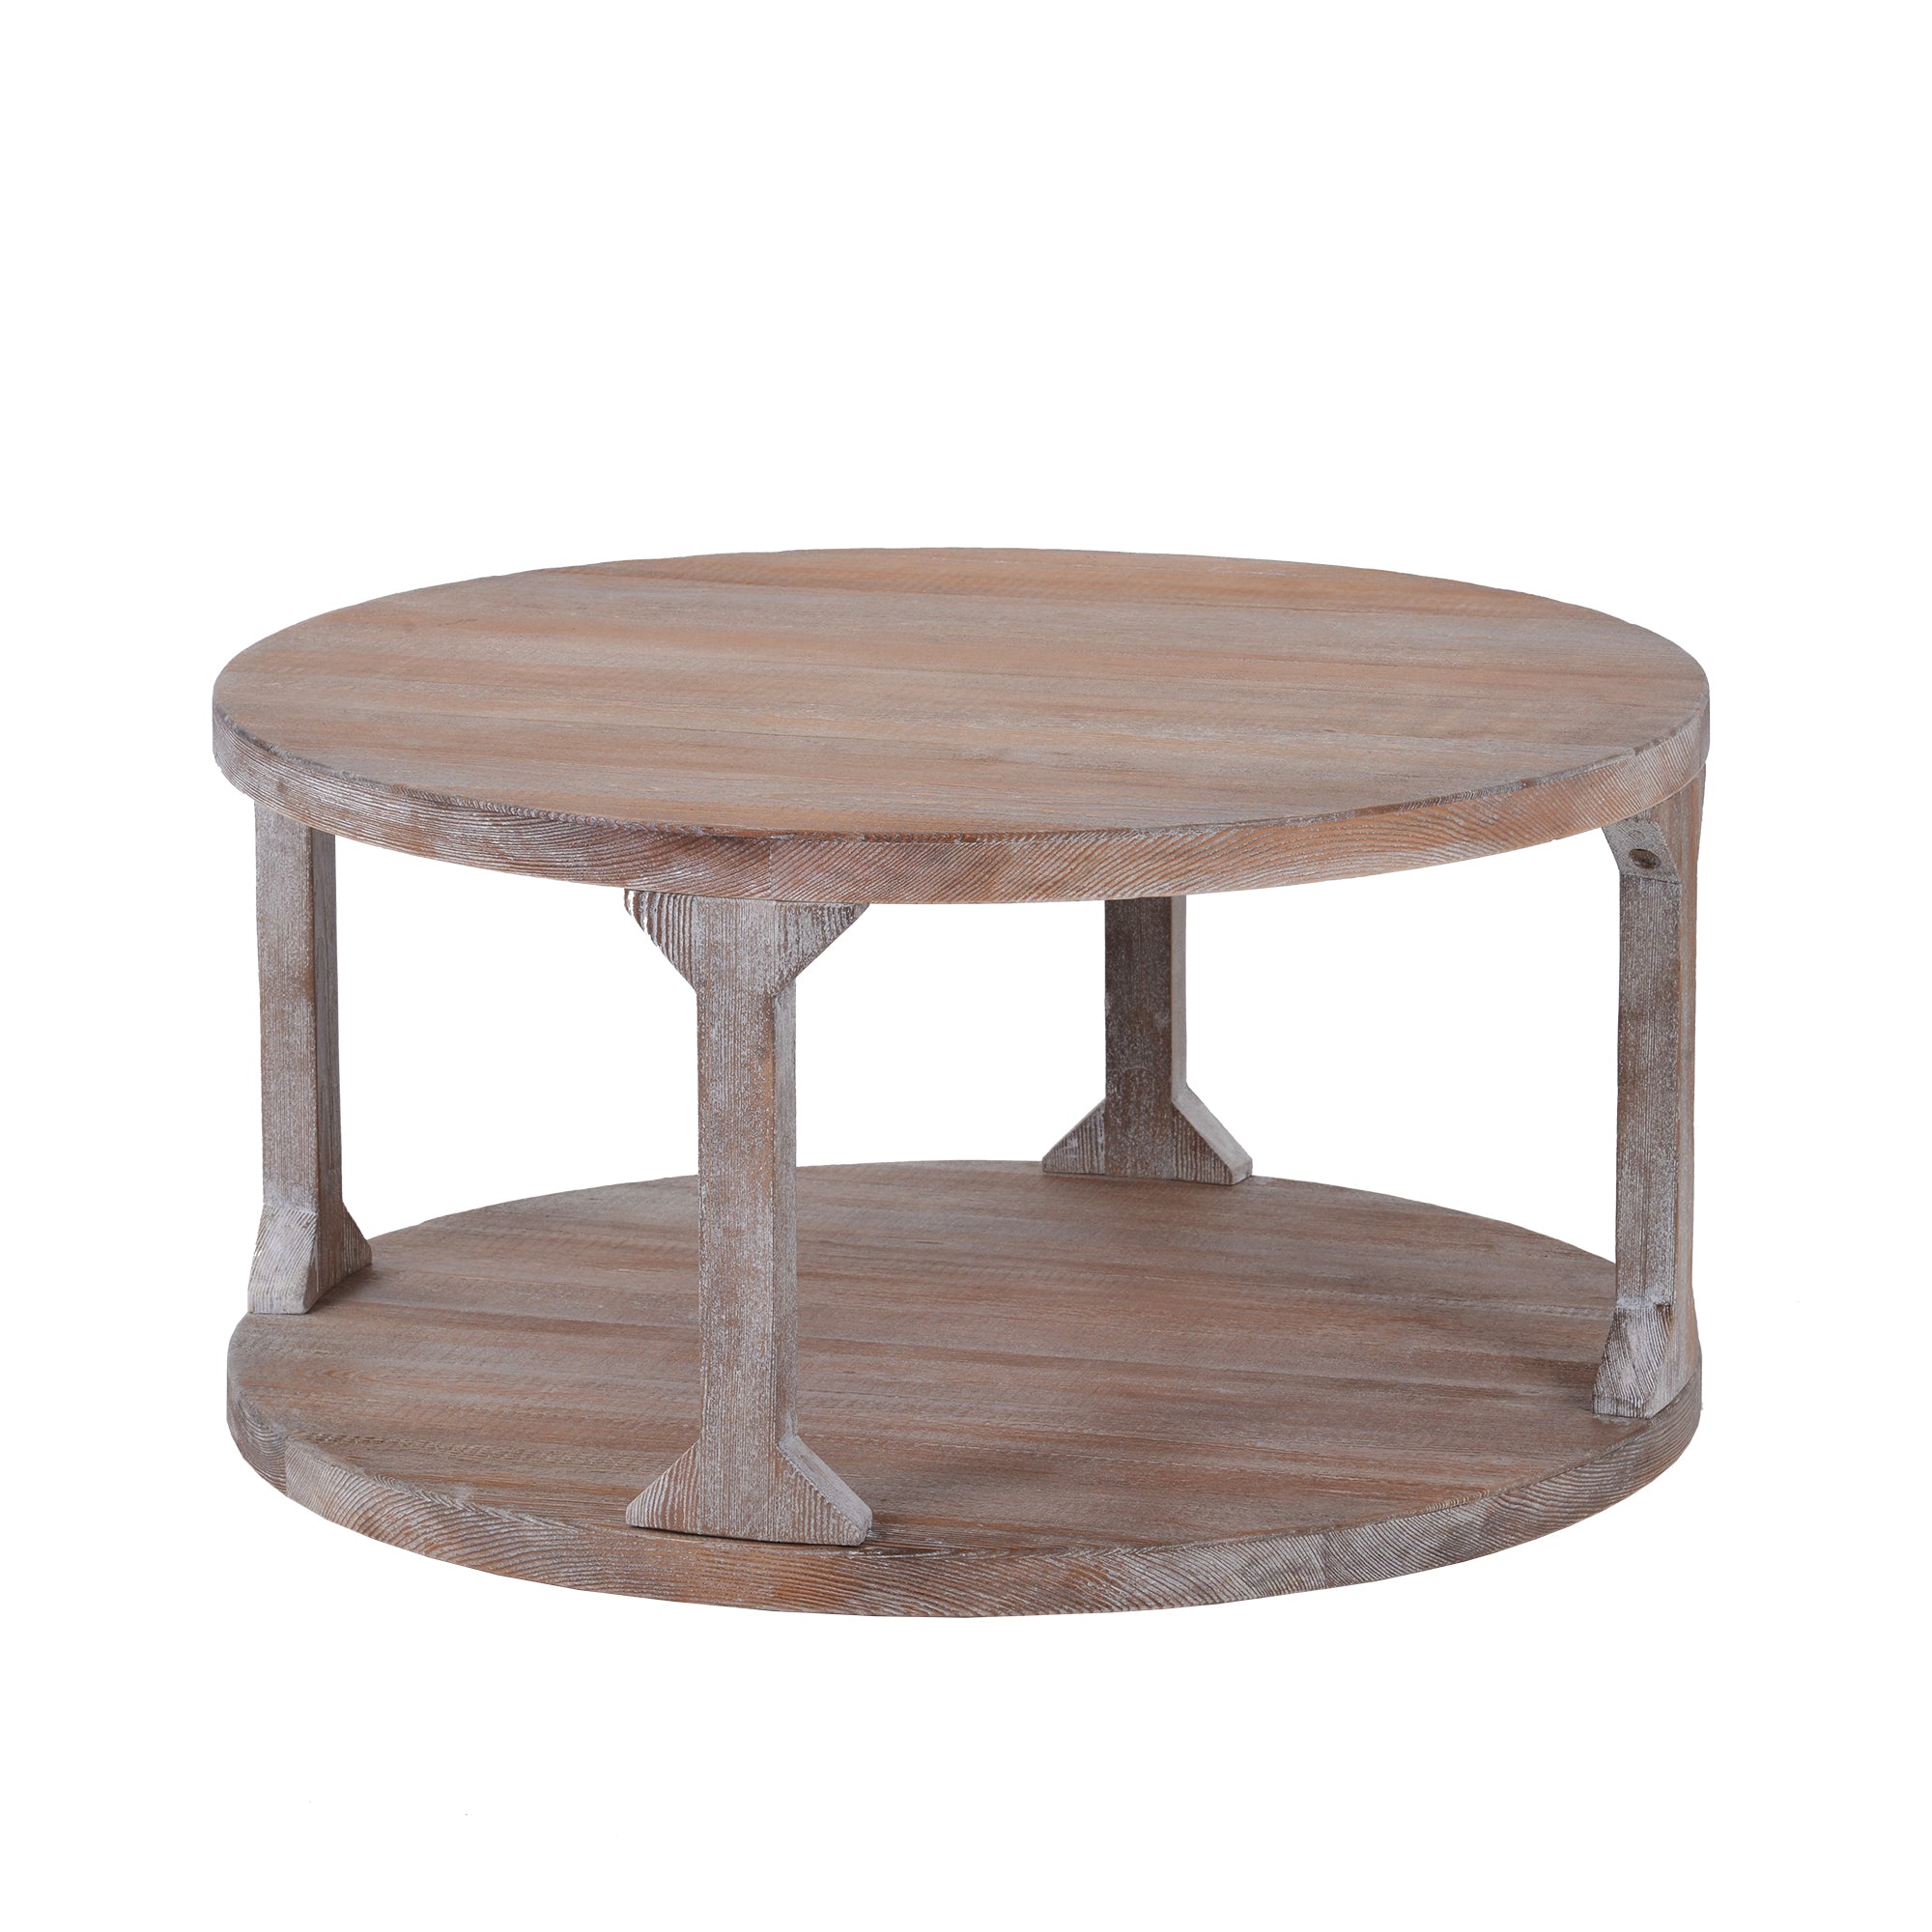 Round Rustic Coffee Table Solid Wood Coffee Table for Living Room with Dusty Wax Coating-Boyel Living